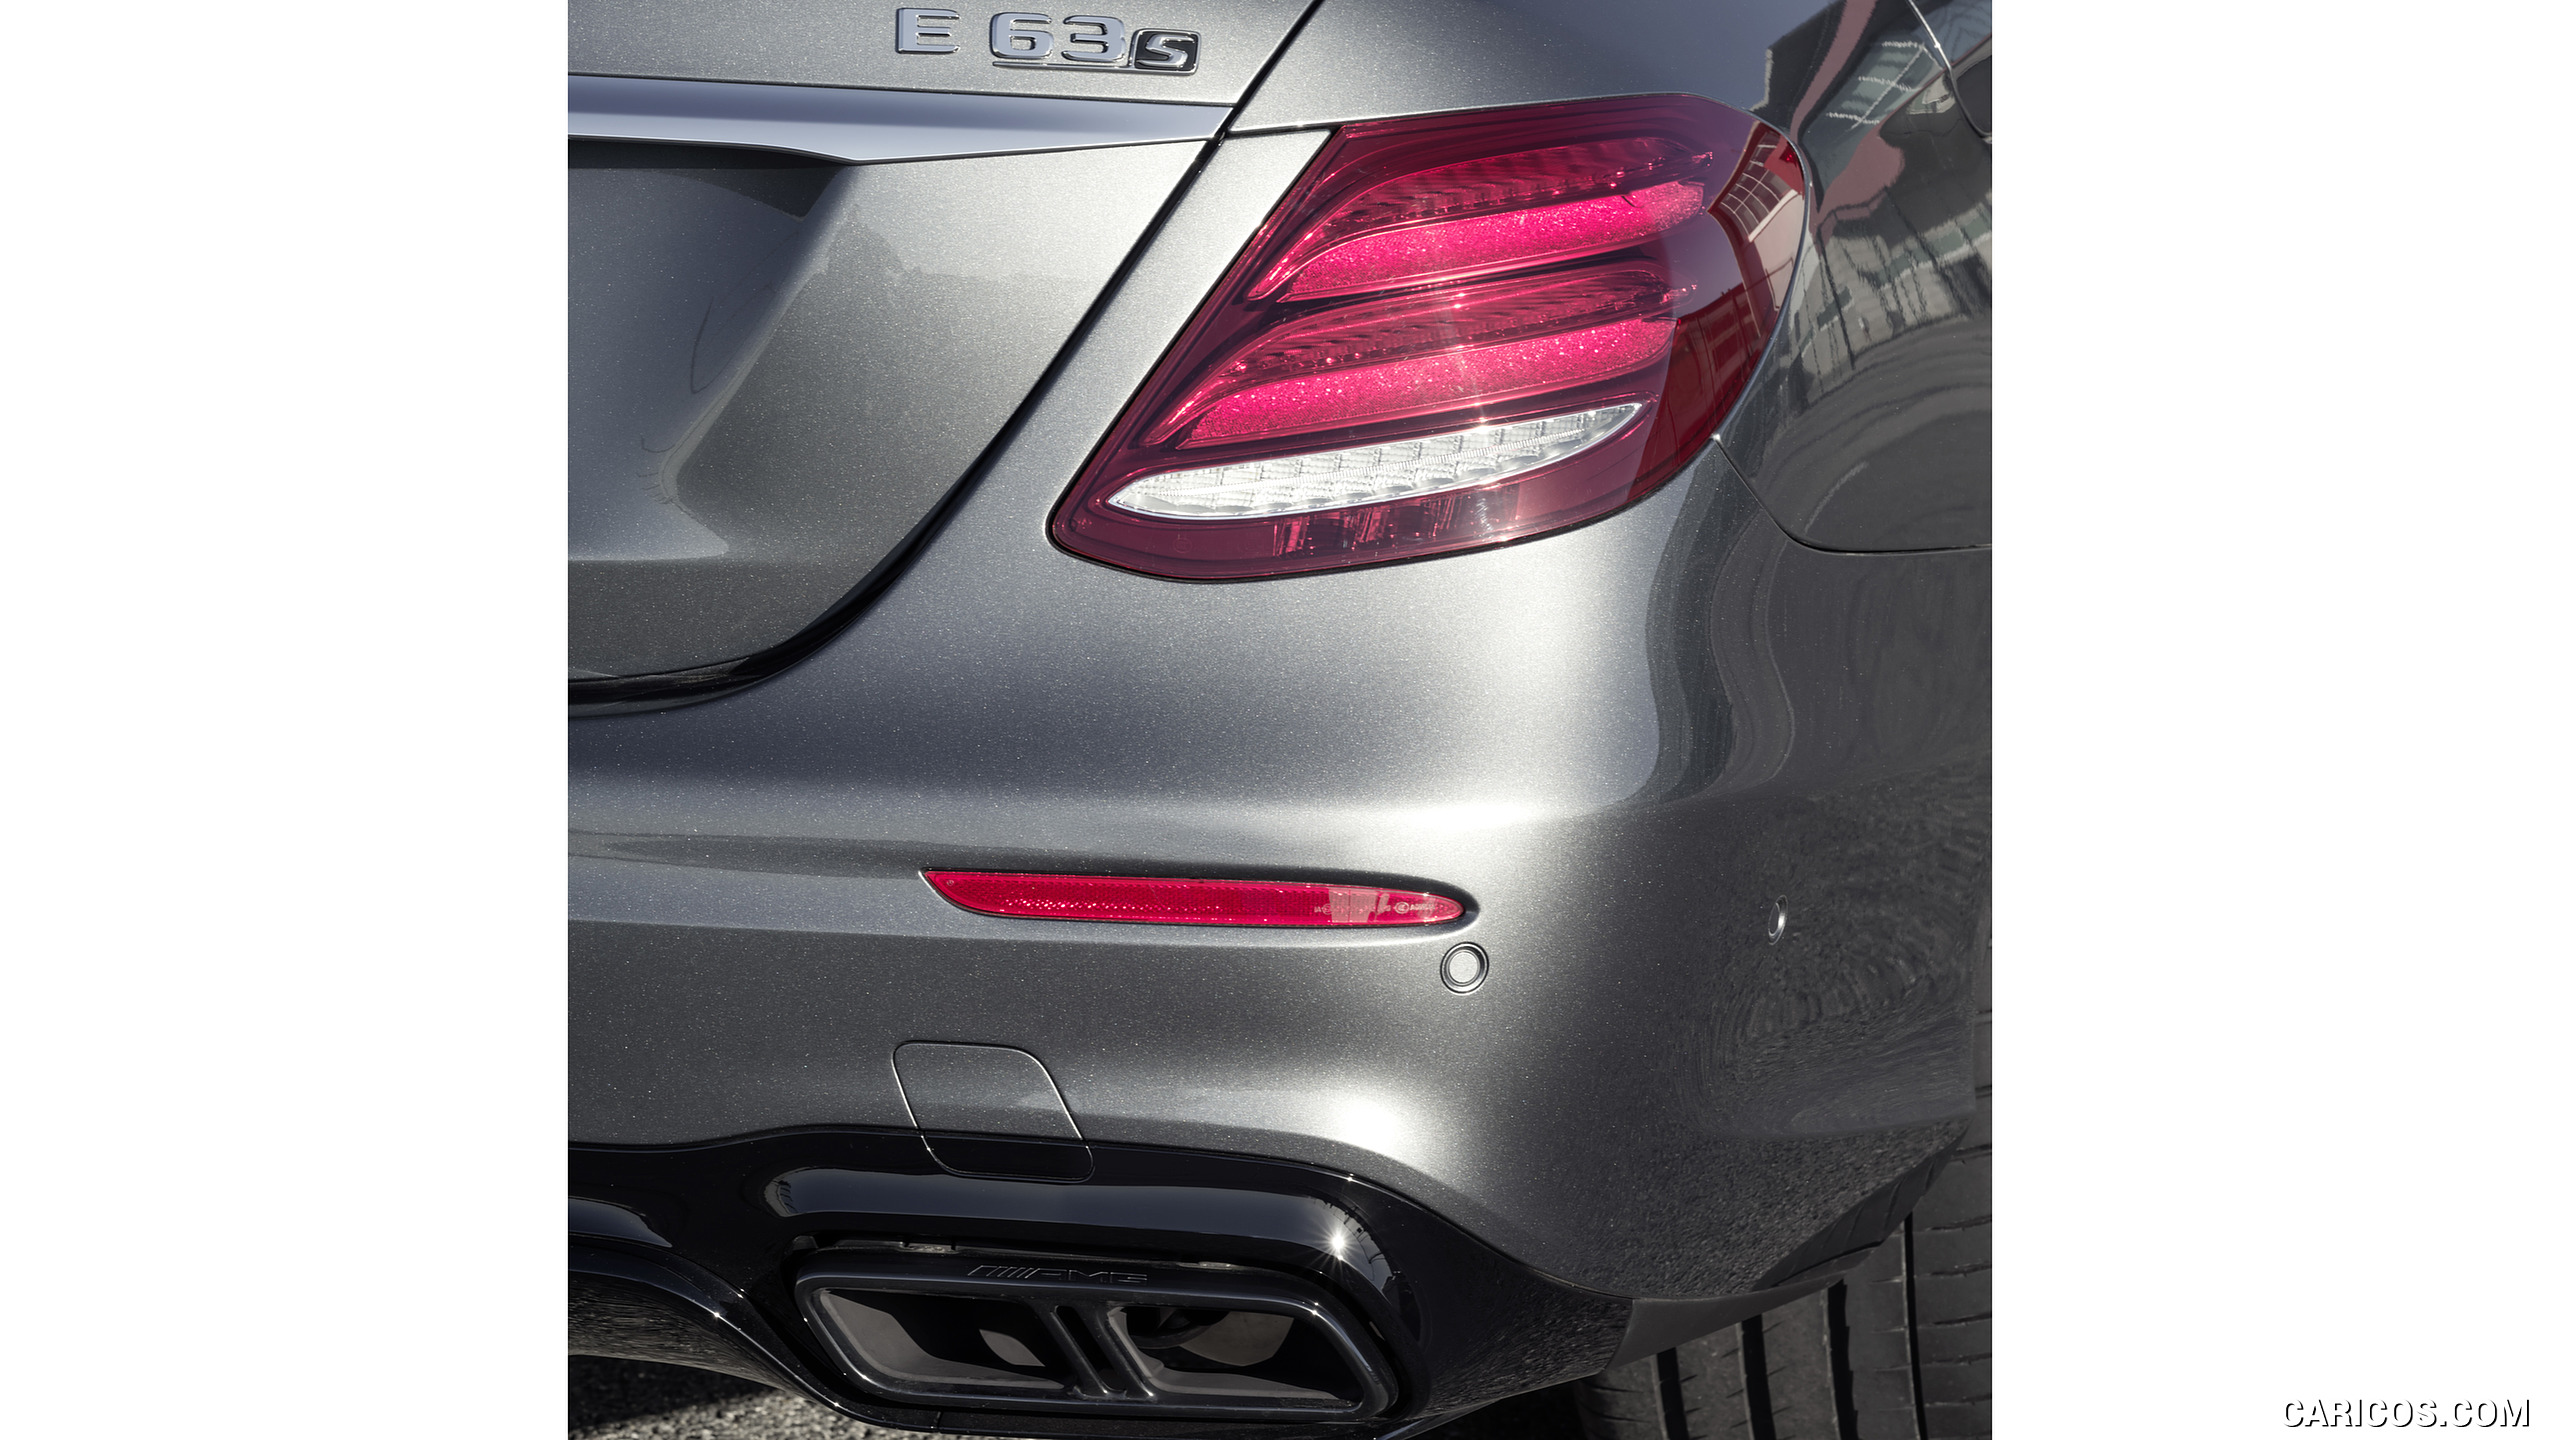 2018 Mercedes-AMG E63 S 4MATIC+ - Tail Light / Exhaust, #30 of 323